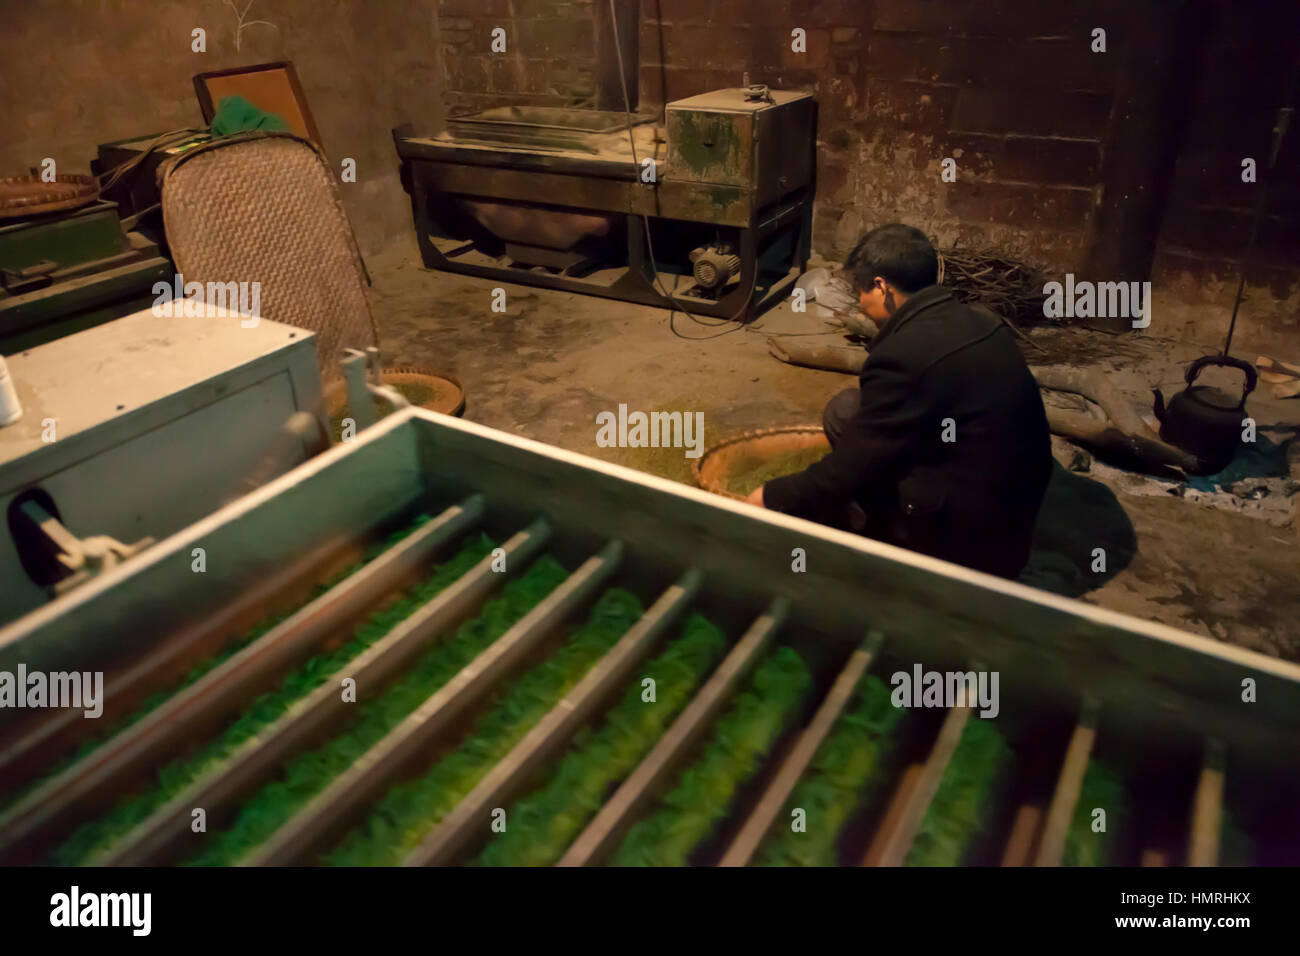 A man singes tender buds of tea in heated jiggling trays of grooved electric machine to prepare the green tea for packaging and selling in China. Stock Photo